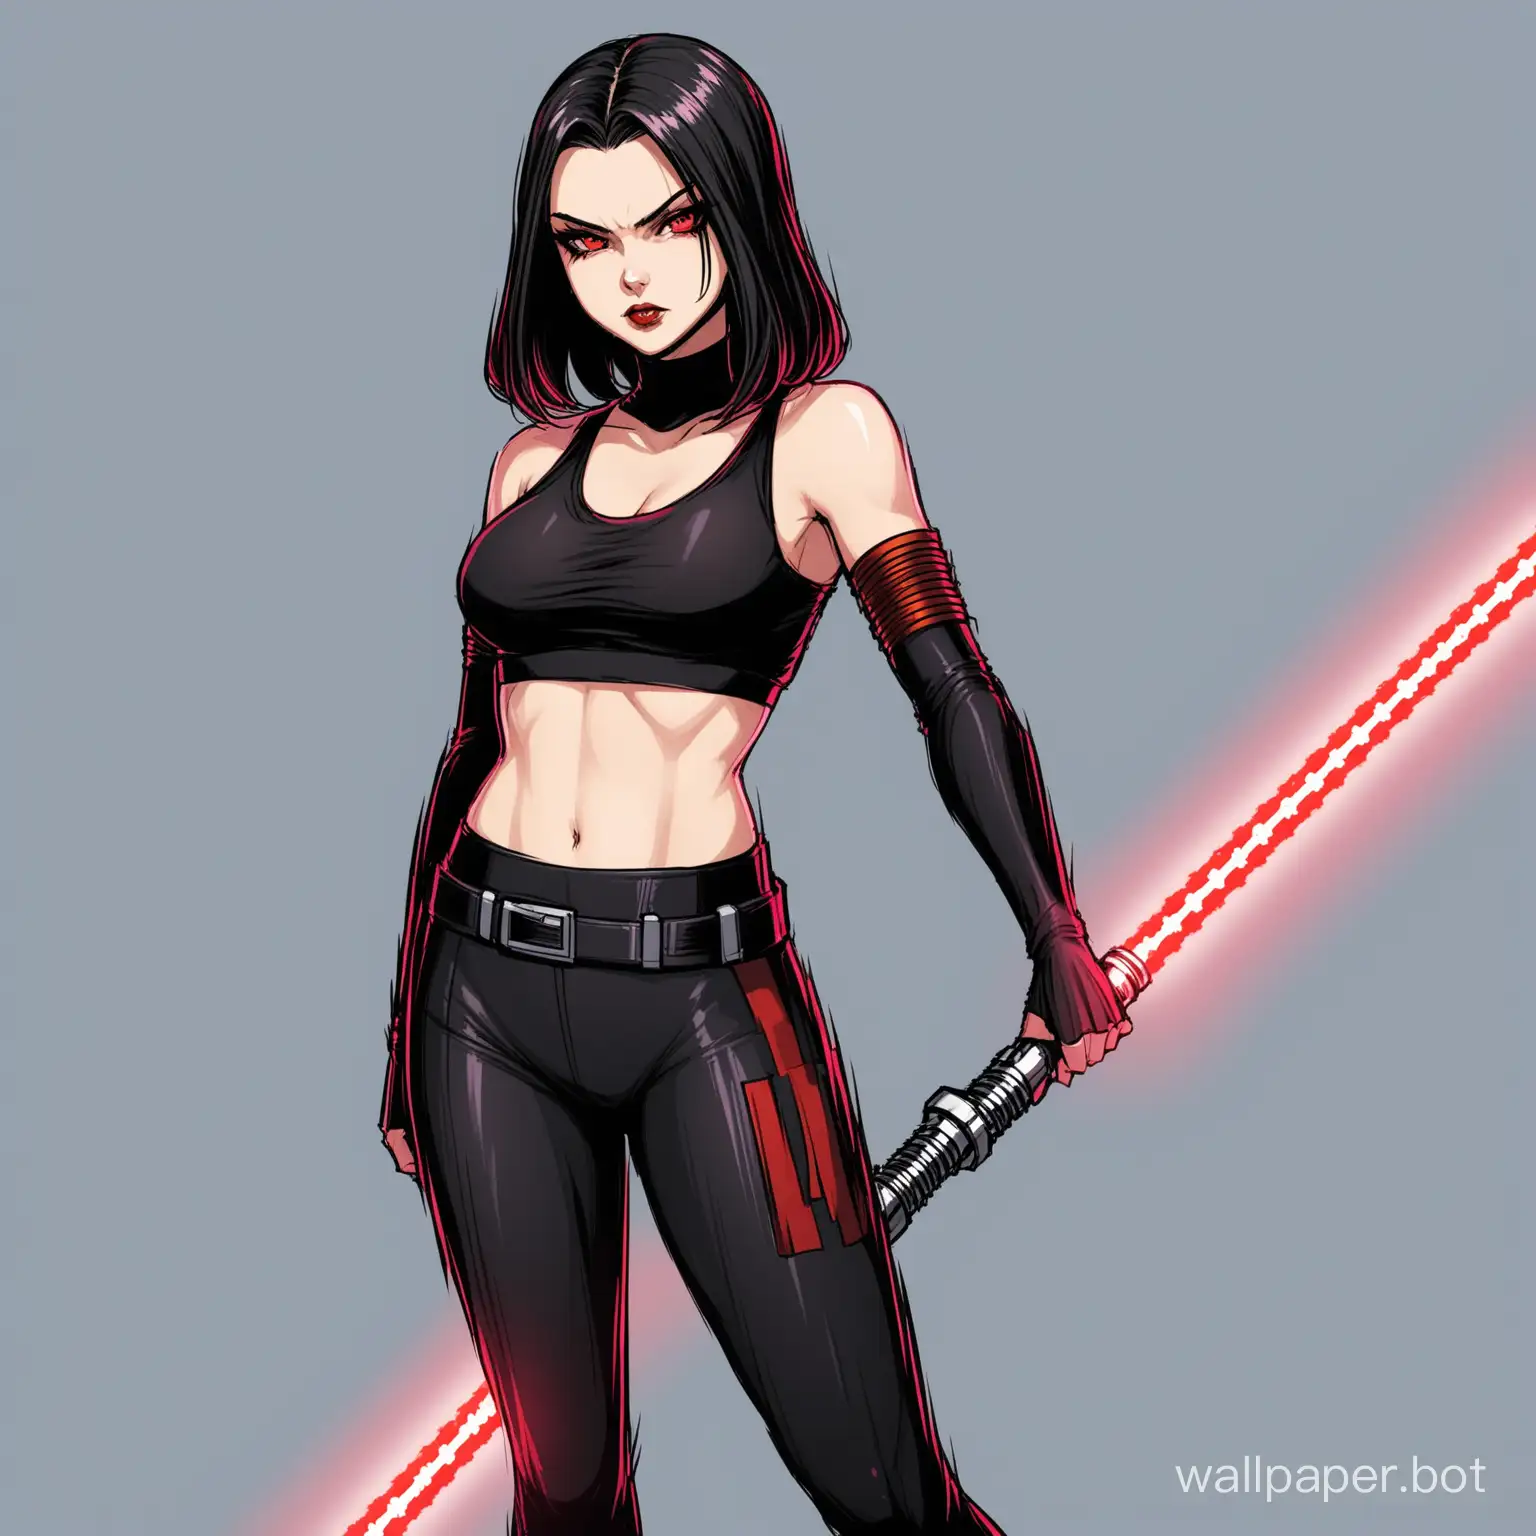 Sith-Warrior-Princess-in-Battle-Attire-with-Dual-Lightsabers